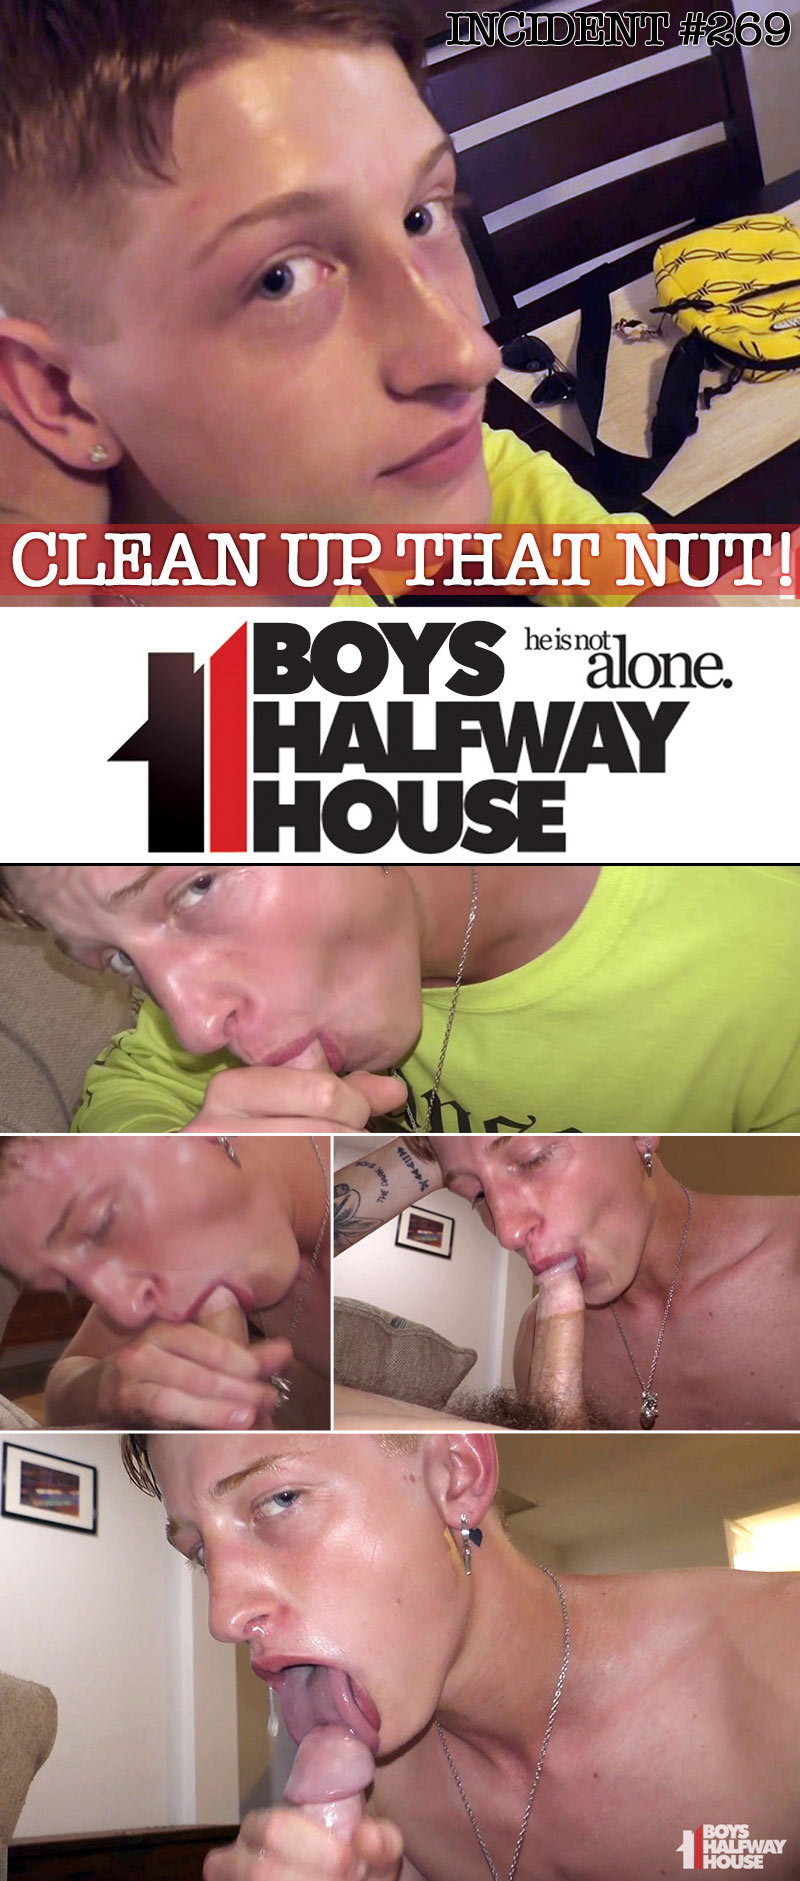 Incident 269: Patrick Raposa Blows Rick Hazard in 'Clean Up That Nut' at Boys Halfway House